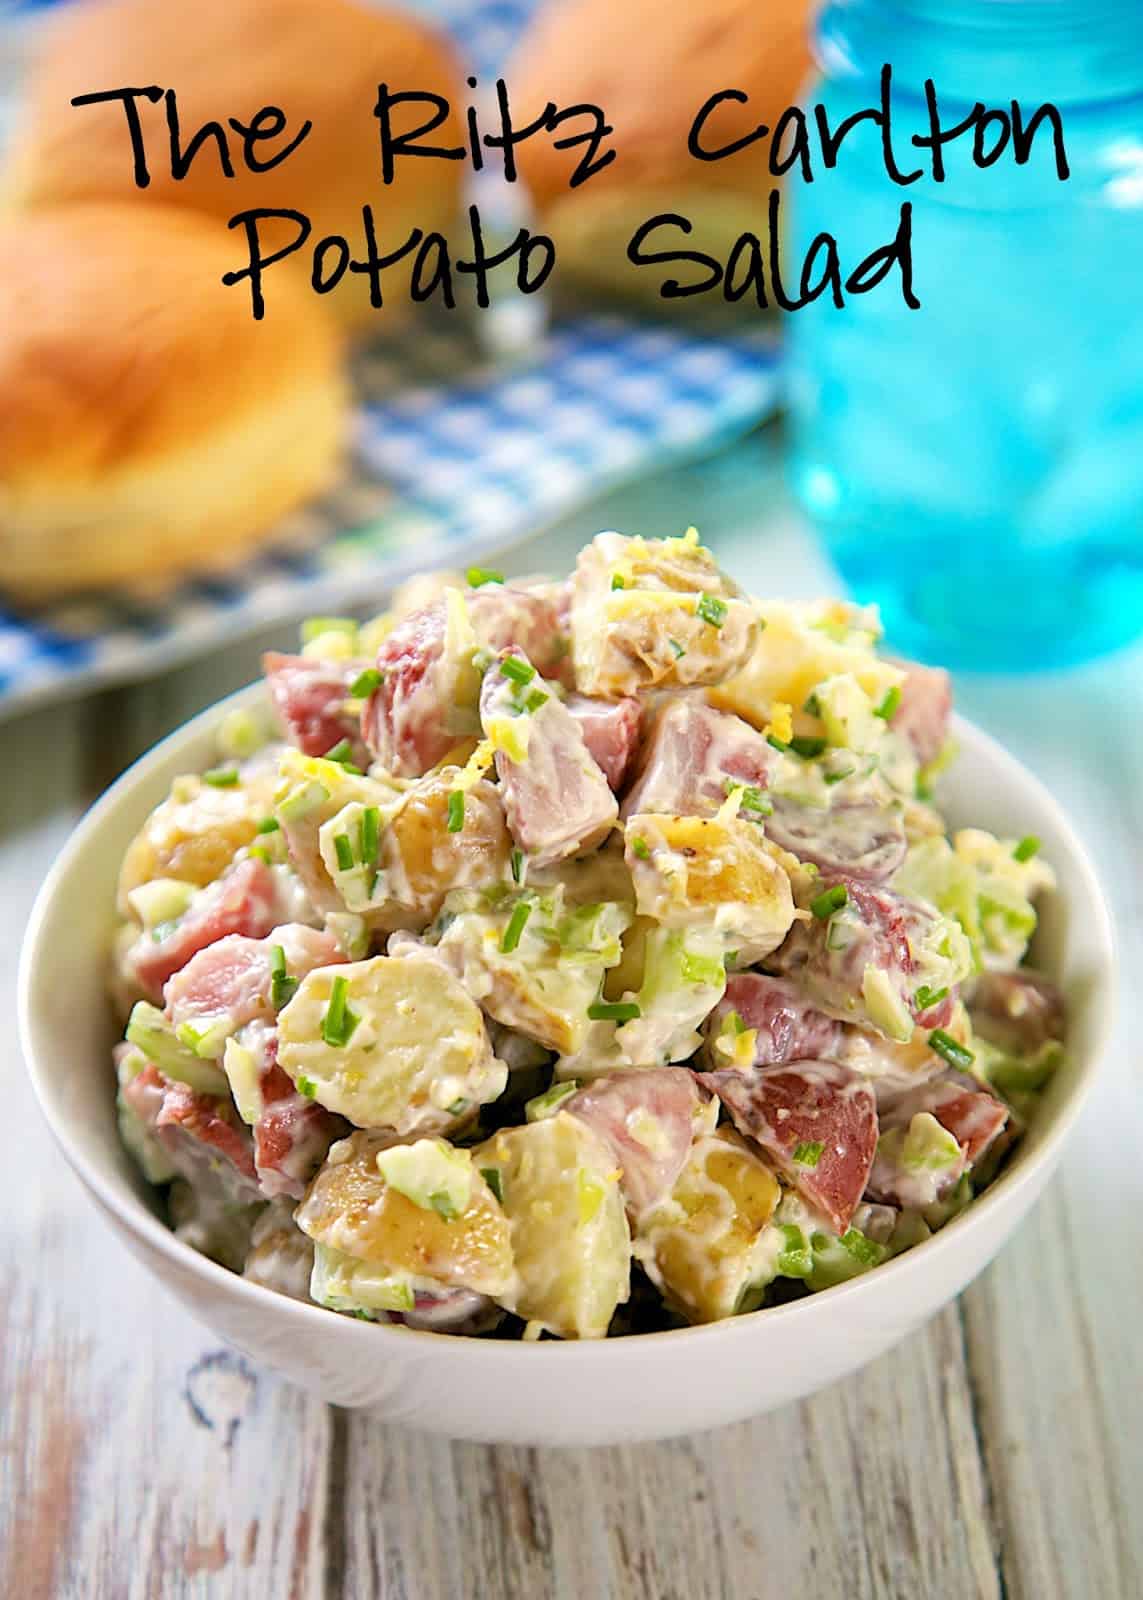 The Ritz Carlton Potato Salad Recipe - heirloom potatoes tossed in mayonnaise, celery, fresh chives and tarragon, and lemon juice - tastes amazing. Everyone always asks for the recipe!